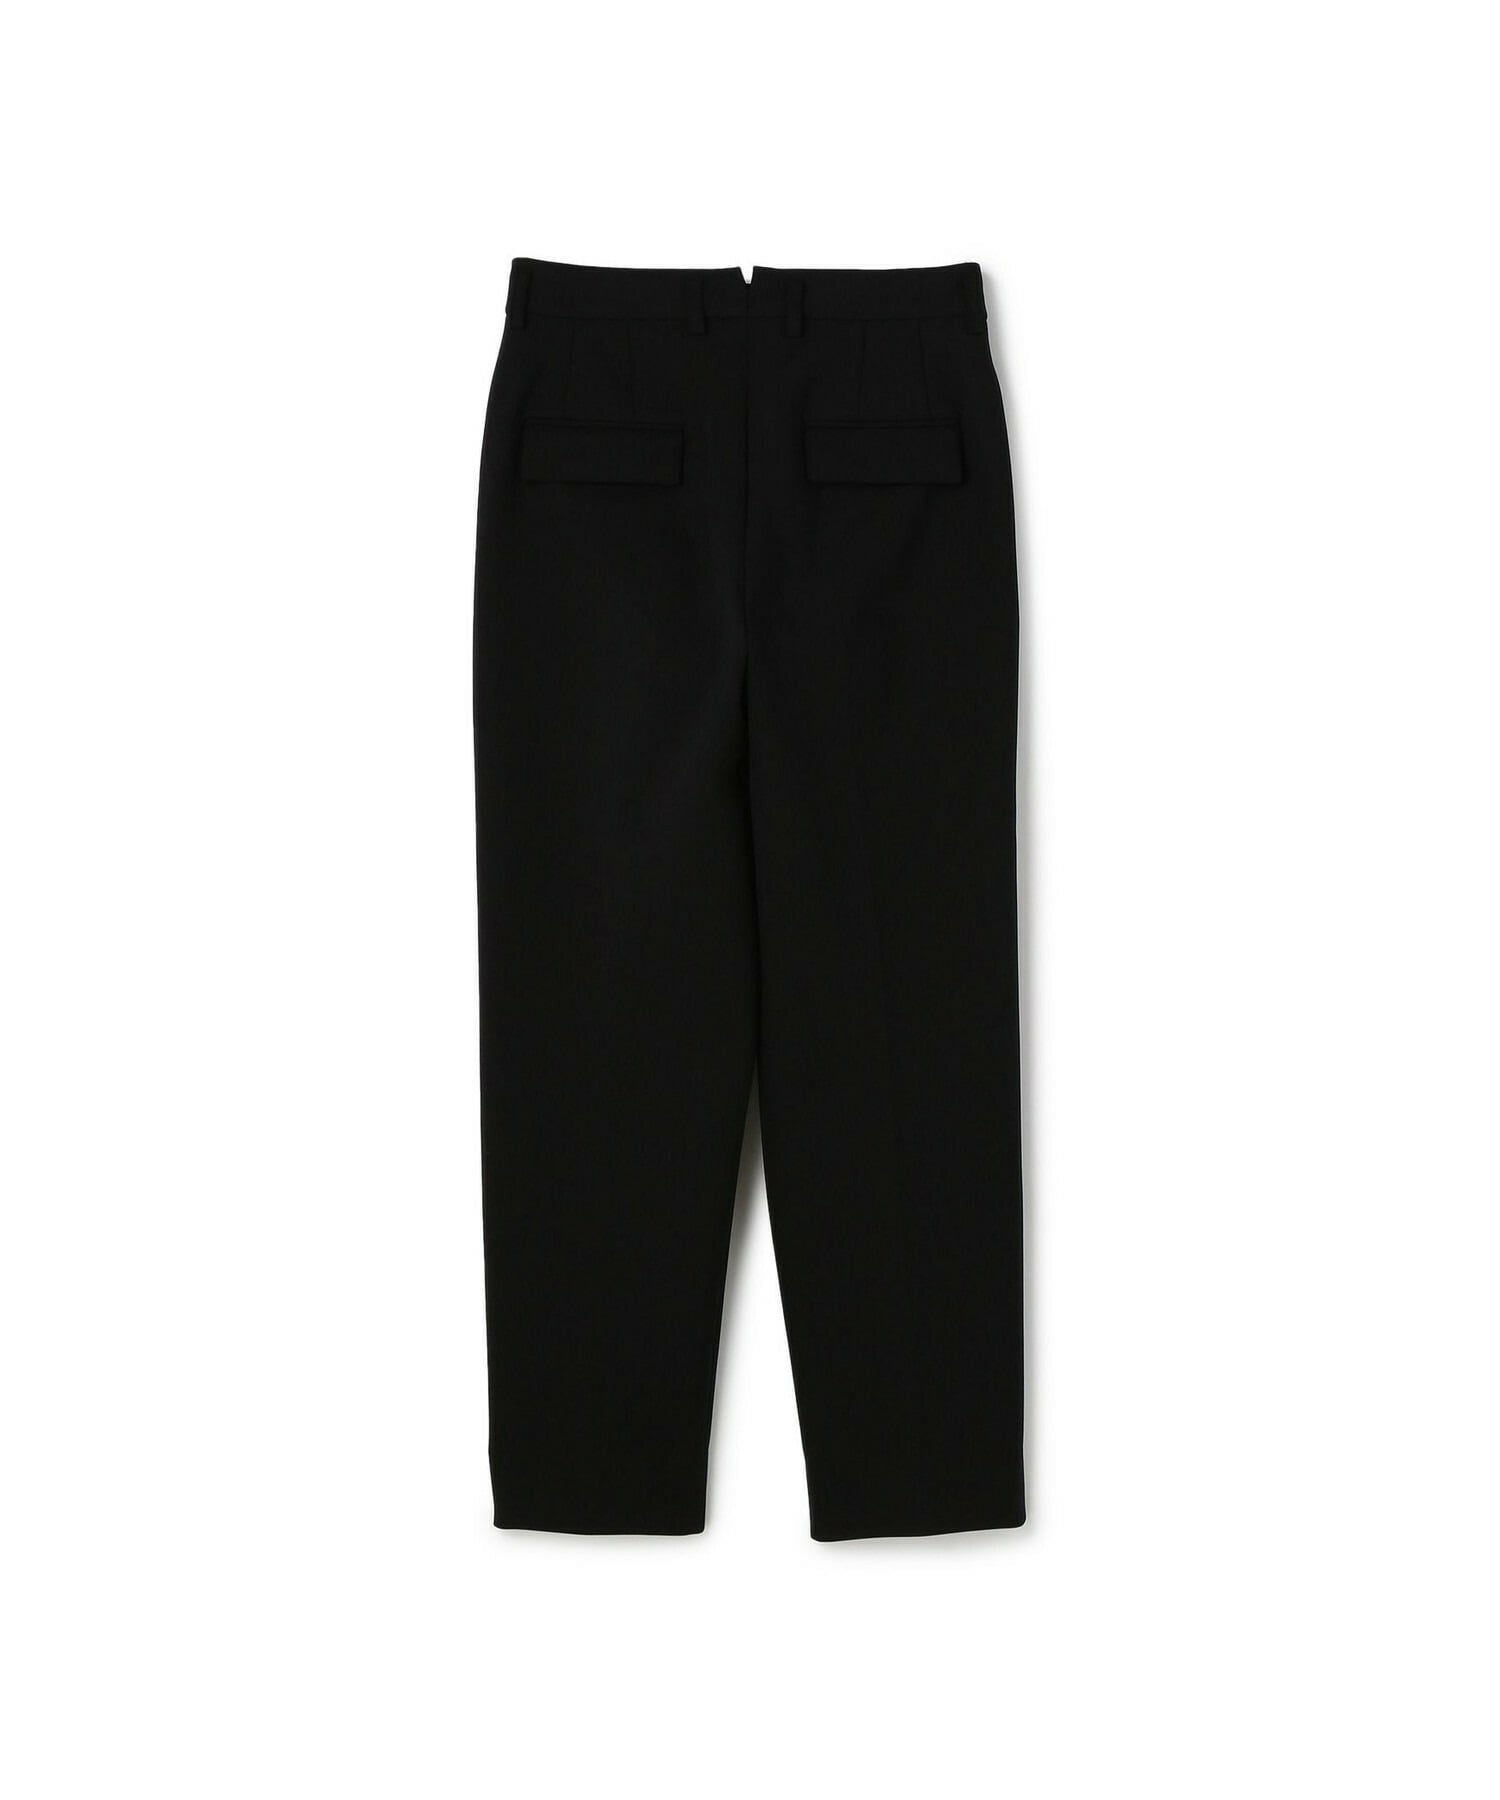 【yoshie inaba】RECYCLE NYLON DOUBLE PLEATED TAPERED  PANTS 詳細画像 ブラック 6